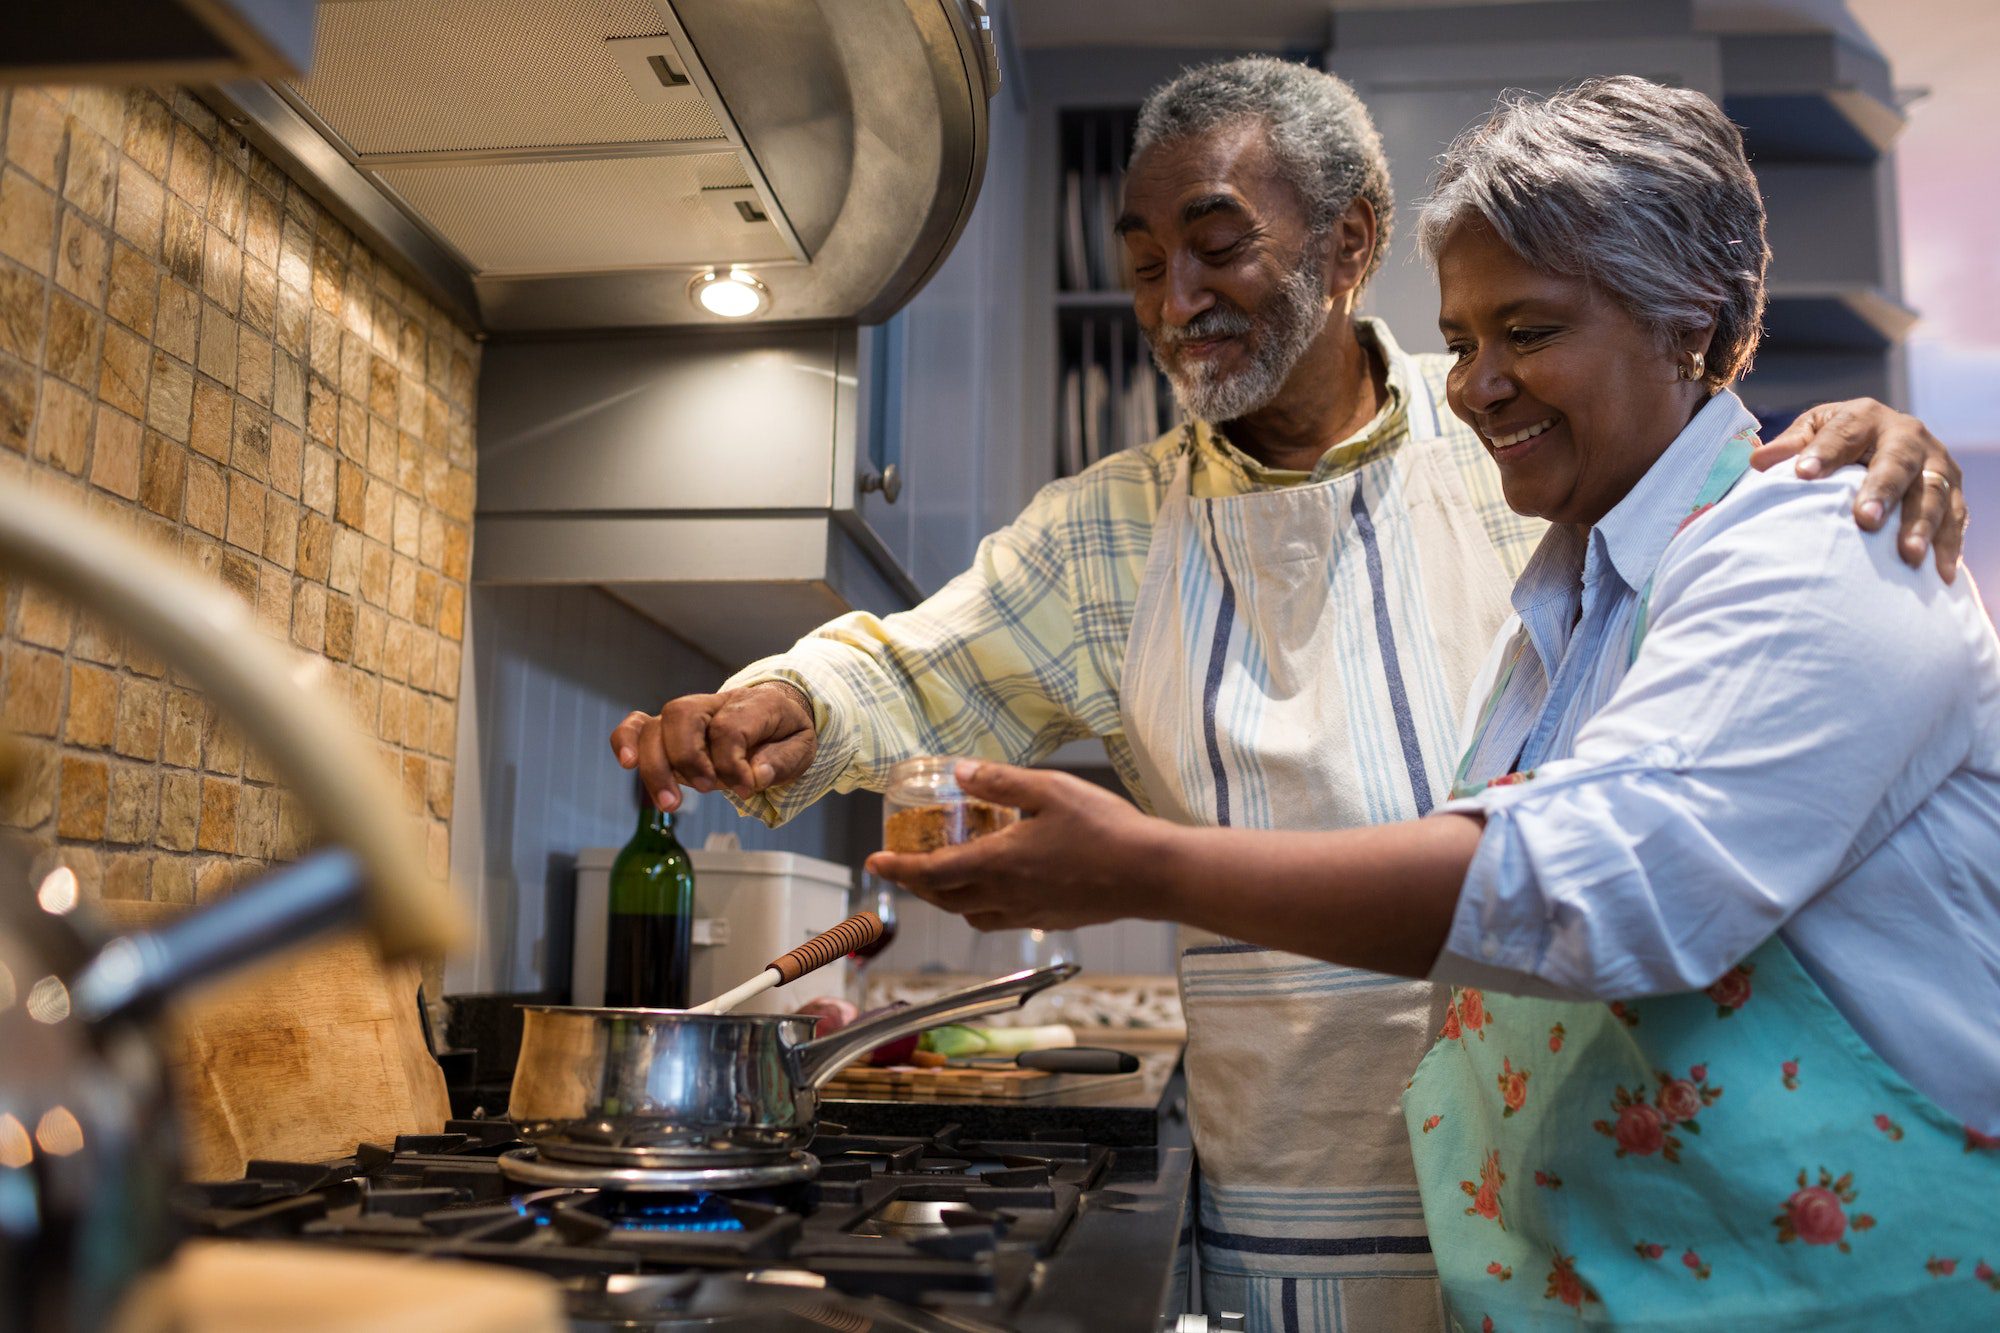 Smiling senior couple preparing food in kitchen ready for Annual Enrollment Period